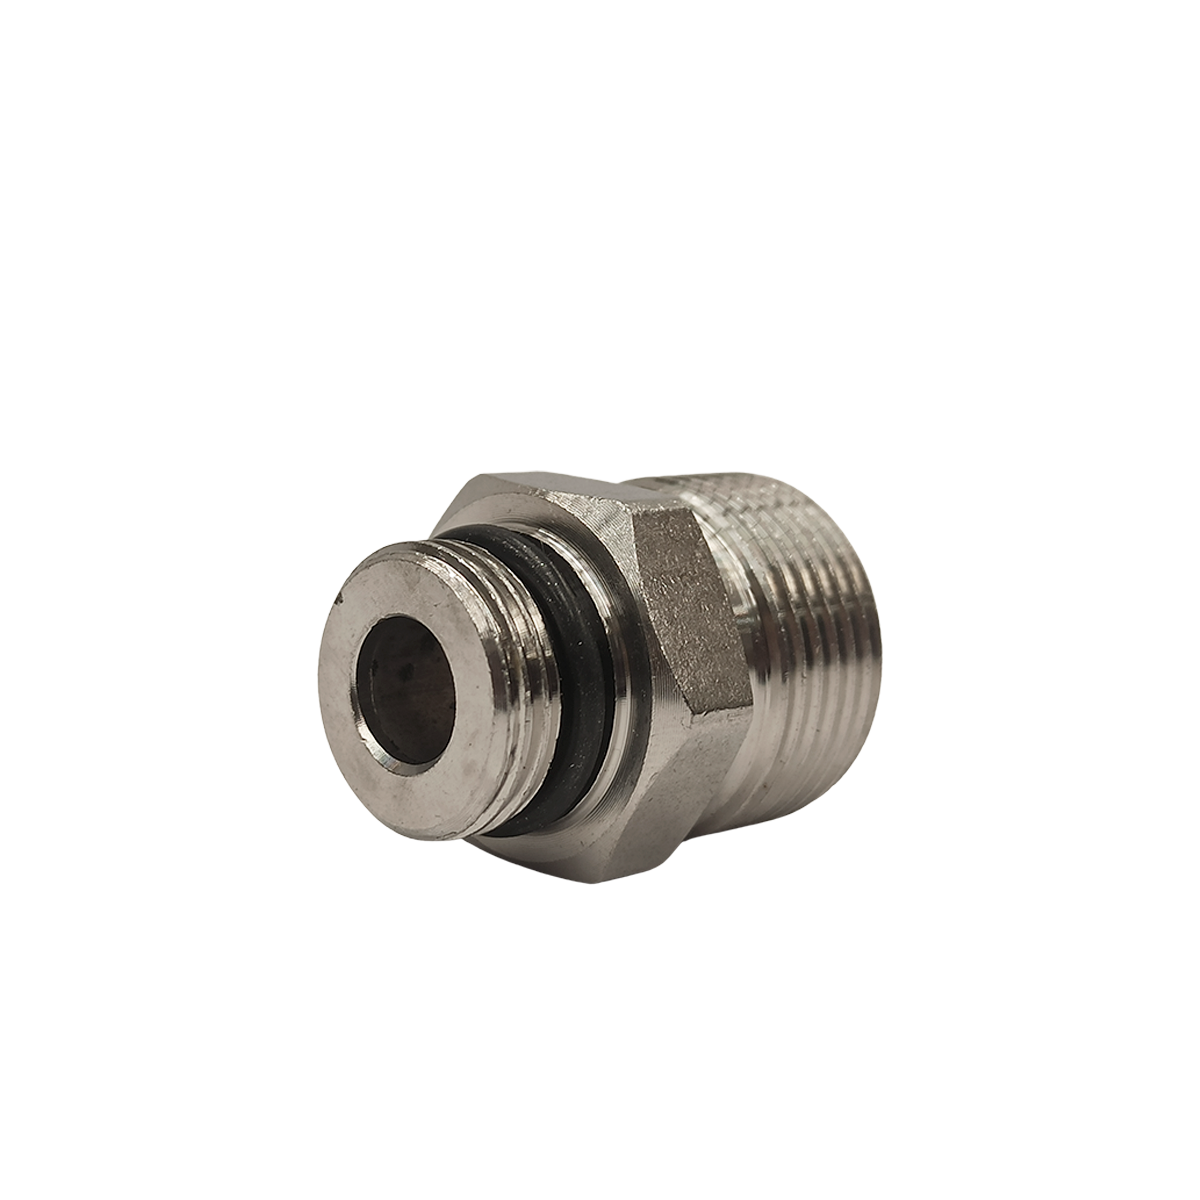 Conector He M22 X M14 X 3/8 - 0